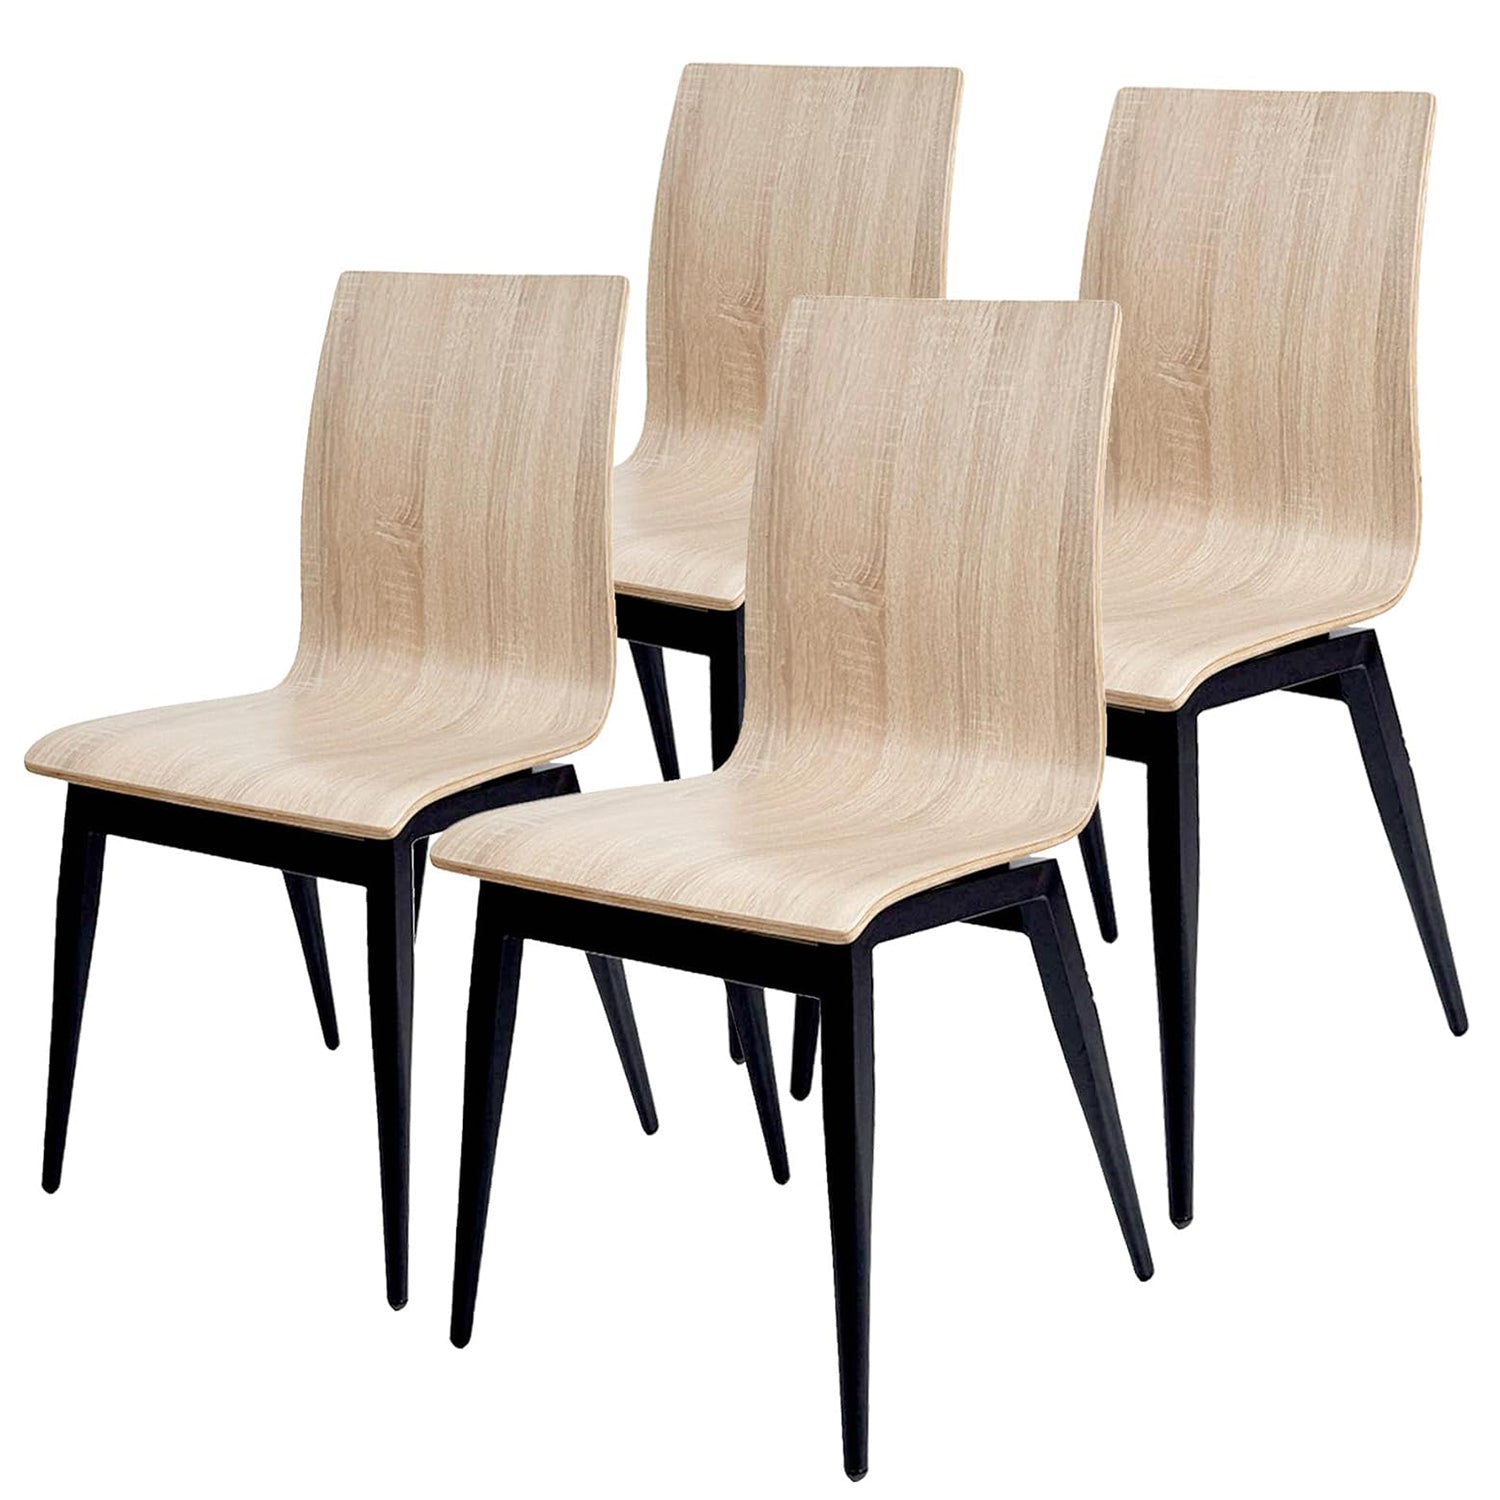 Set of 4 Modern Kitchen Chairs with Wooden Seat and Metal Legs Dining Side Chair, light Brown